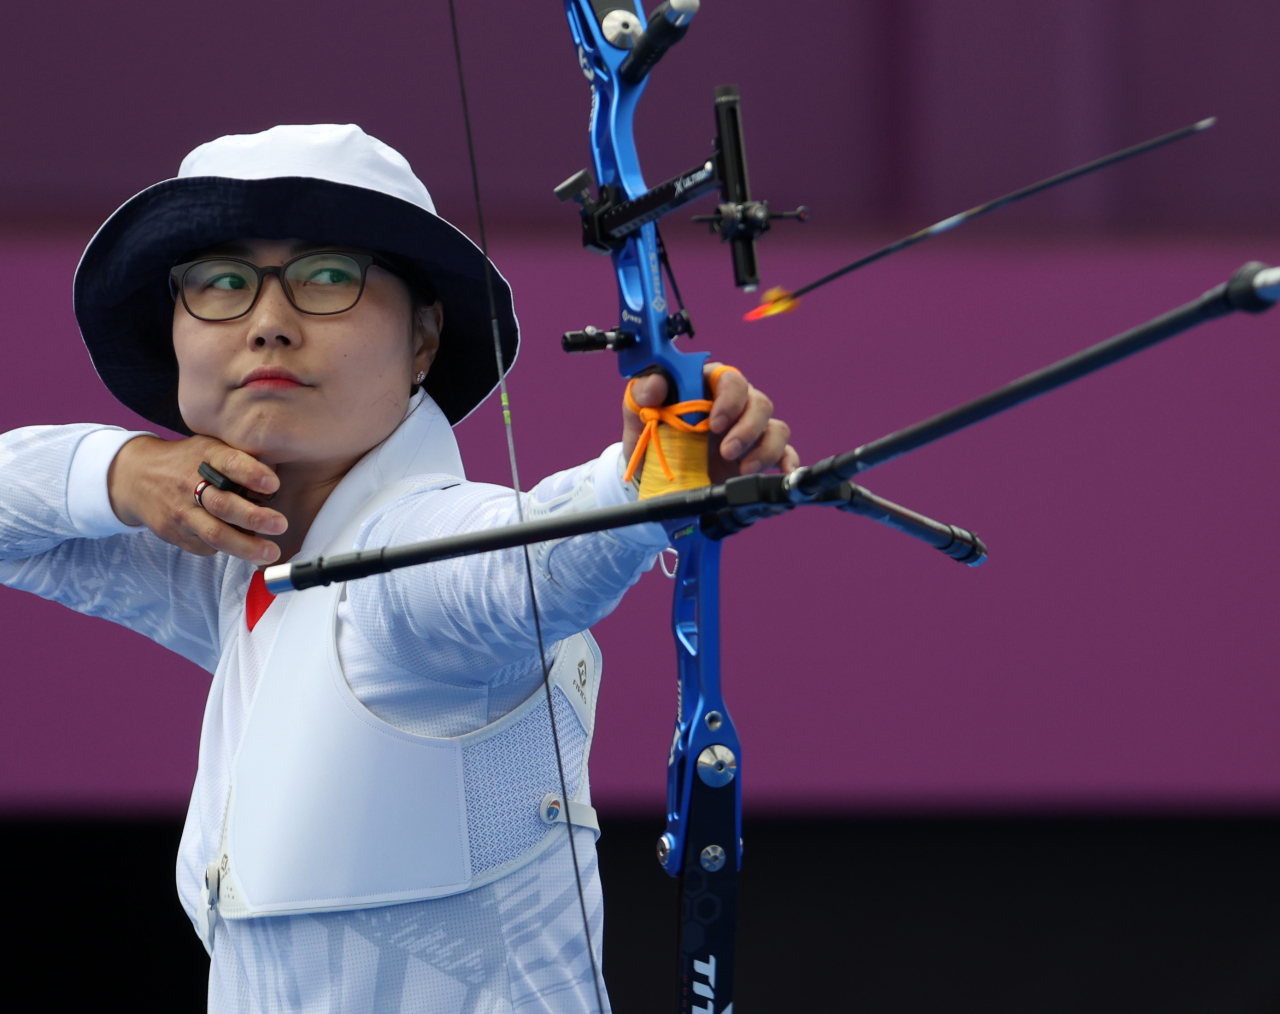 Ren Hayakawa of Japan competes in the round of 16 match against An San of South Korea in the round of 16 in the women's archery individual event at the Tokyo Olympics at Yumenoshima Park Archery Field in Tokyo on Friday. (Yonhap)